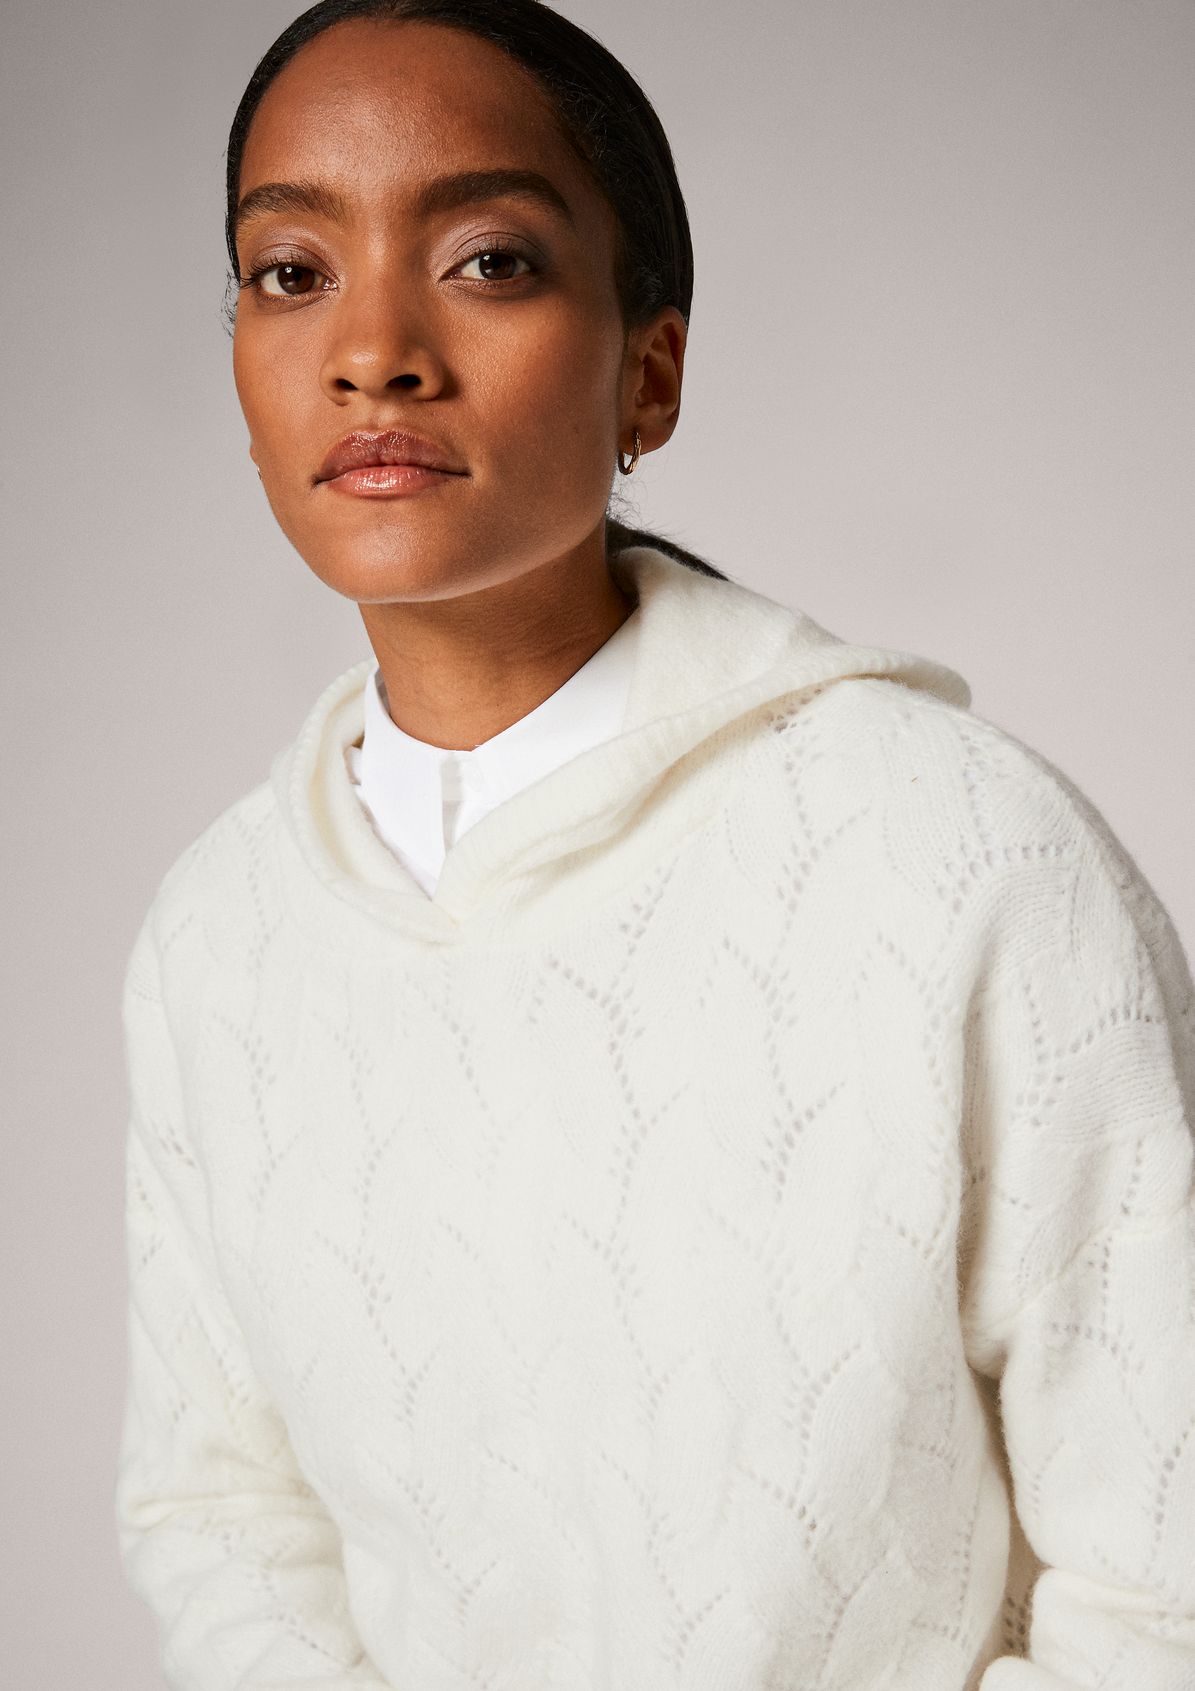 Jumper with an openwork pattern from comma